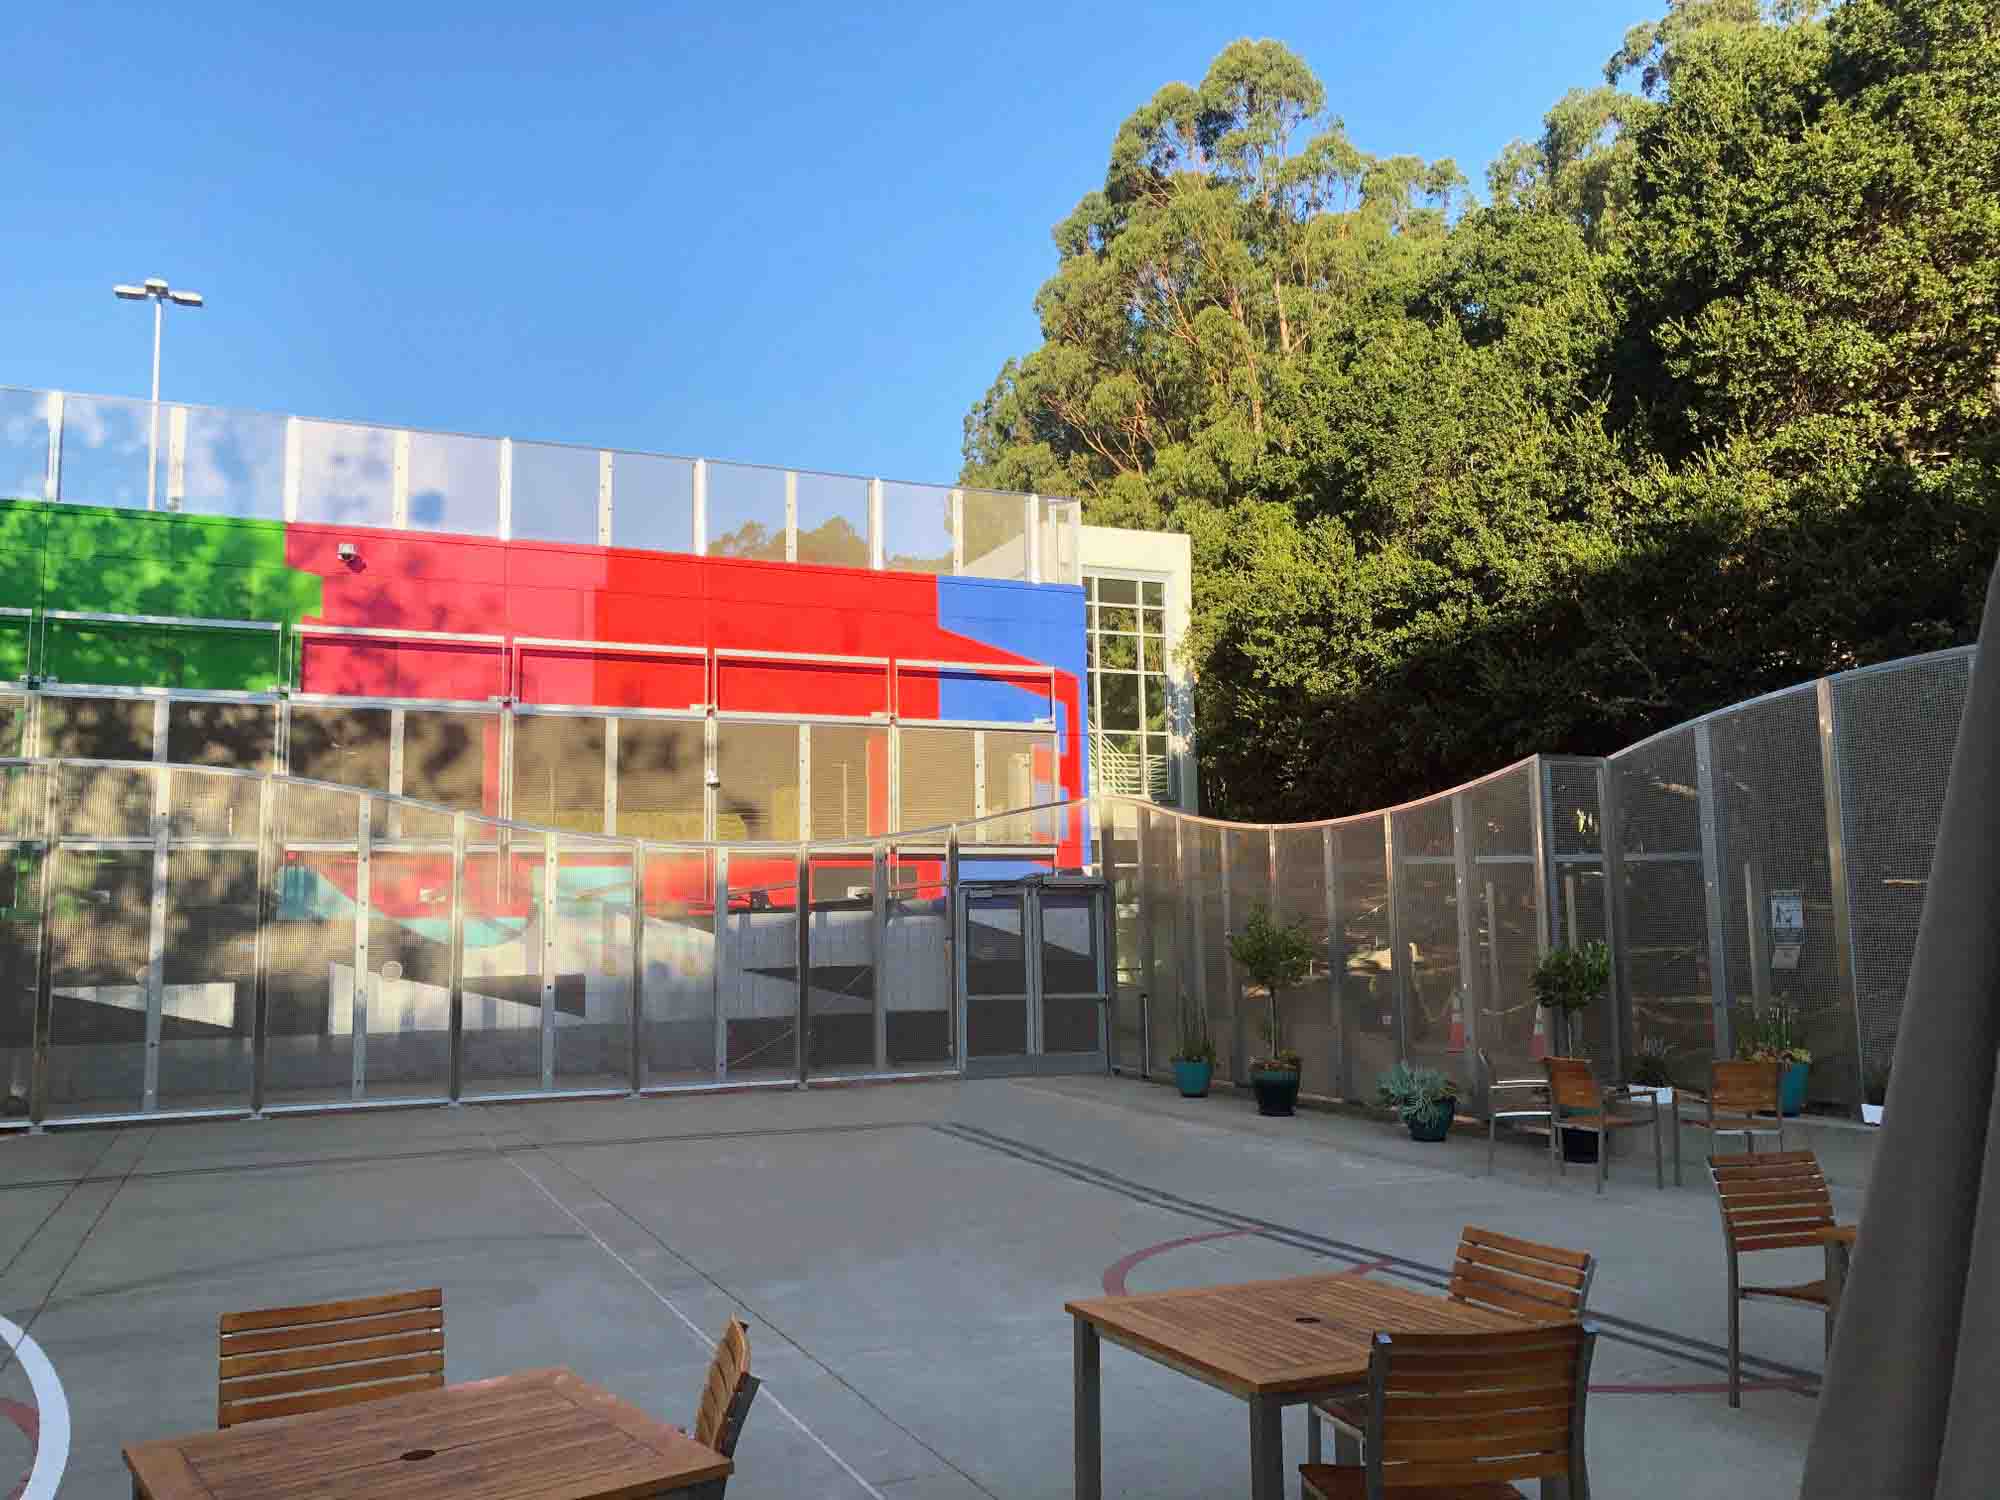 Designer Mesh Infill Panels used in a courtyard at Youtube HQ.